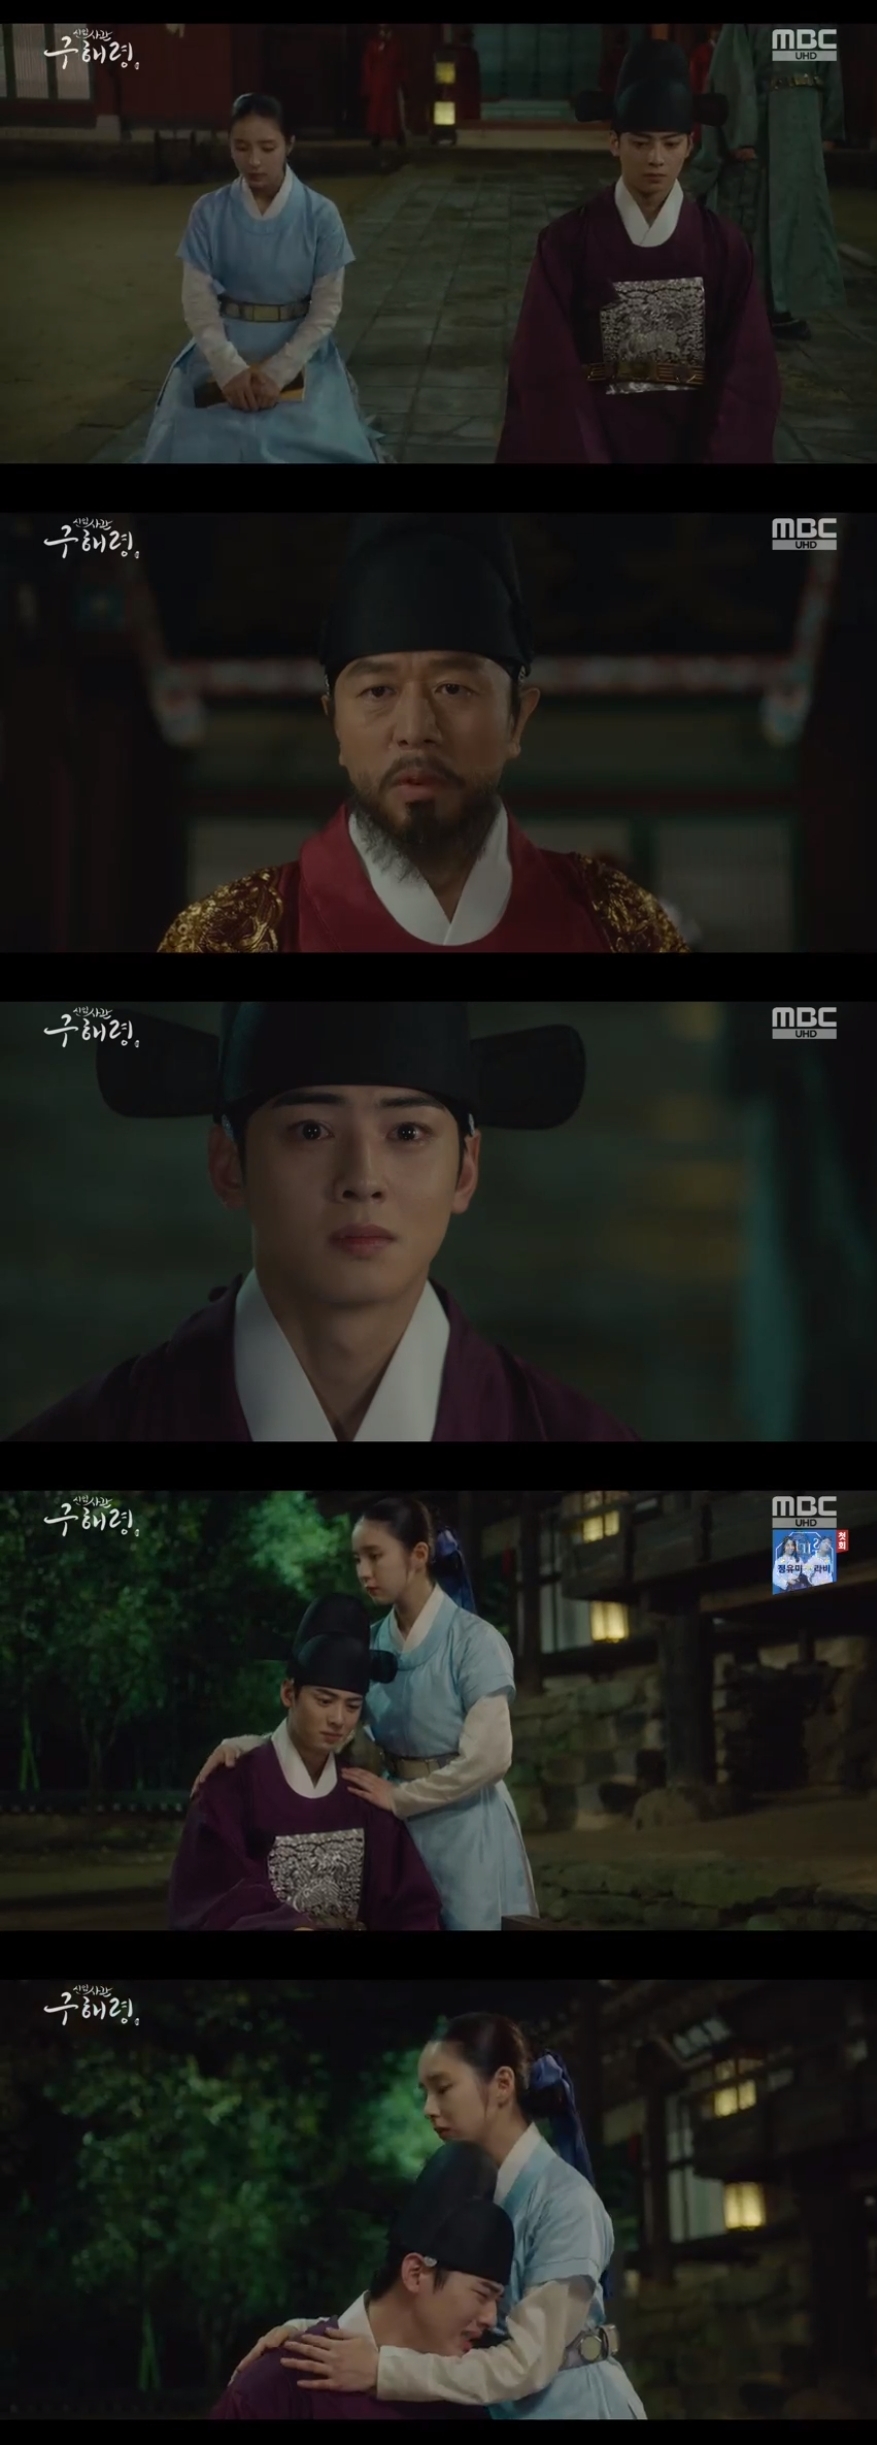 Shin Se-kyung, a new officer Rookie Historian Goo Hae-ryung, comforted Tea Jung Eun-woos tears.In the 35th episode of MBCs tree drama The New Entrepreneur Rookie Historian Goo Hae-ryung broadcast on the 19th, Lee Rim (Jung Eun-woo) was shown asking King Lee Tae (Kim Min-Sang) to enter the room.On this day, Irim was kneeling on his knees when Itae did not accept the meeting and waited for the night.Upon hearing the news, Rookie Historian Goo Hae-ryung said: Youre not all well yet.Please wake up, he said, but he did not listen.At this time, King Itae appeared late. When Itae shouted what he wanted to ask, Irim said, Has she ever loved the device for a moment?I asked.Irim said, Have you ever thought of me or missed me once. Have you ever been fond of me?I ask in Abamamas mind whether I am a son. I heard it with a hard face.Lee Tae turned coldly to his servants, leaving only the words Mush to the beginning. Irim said, Abamama.After that, Irim returned to the melted hall and shed tears silently.Rookie Historian Goo Hae-ryung, who watched this, comforted Lee with Lee Lim and added tears to her sadness.